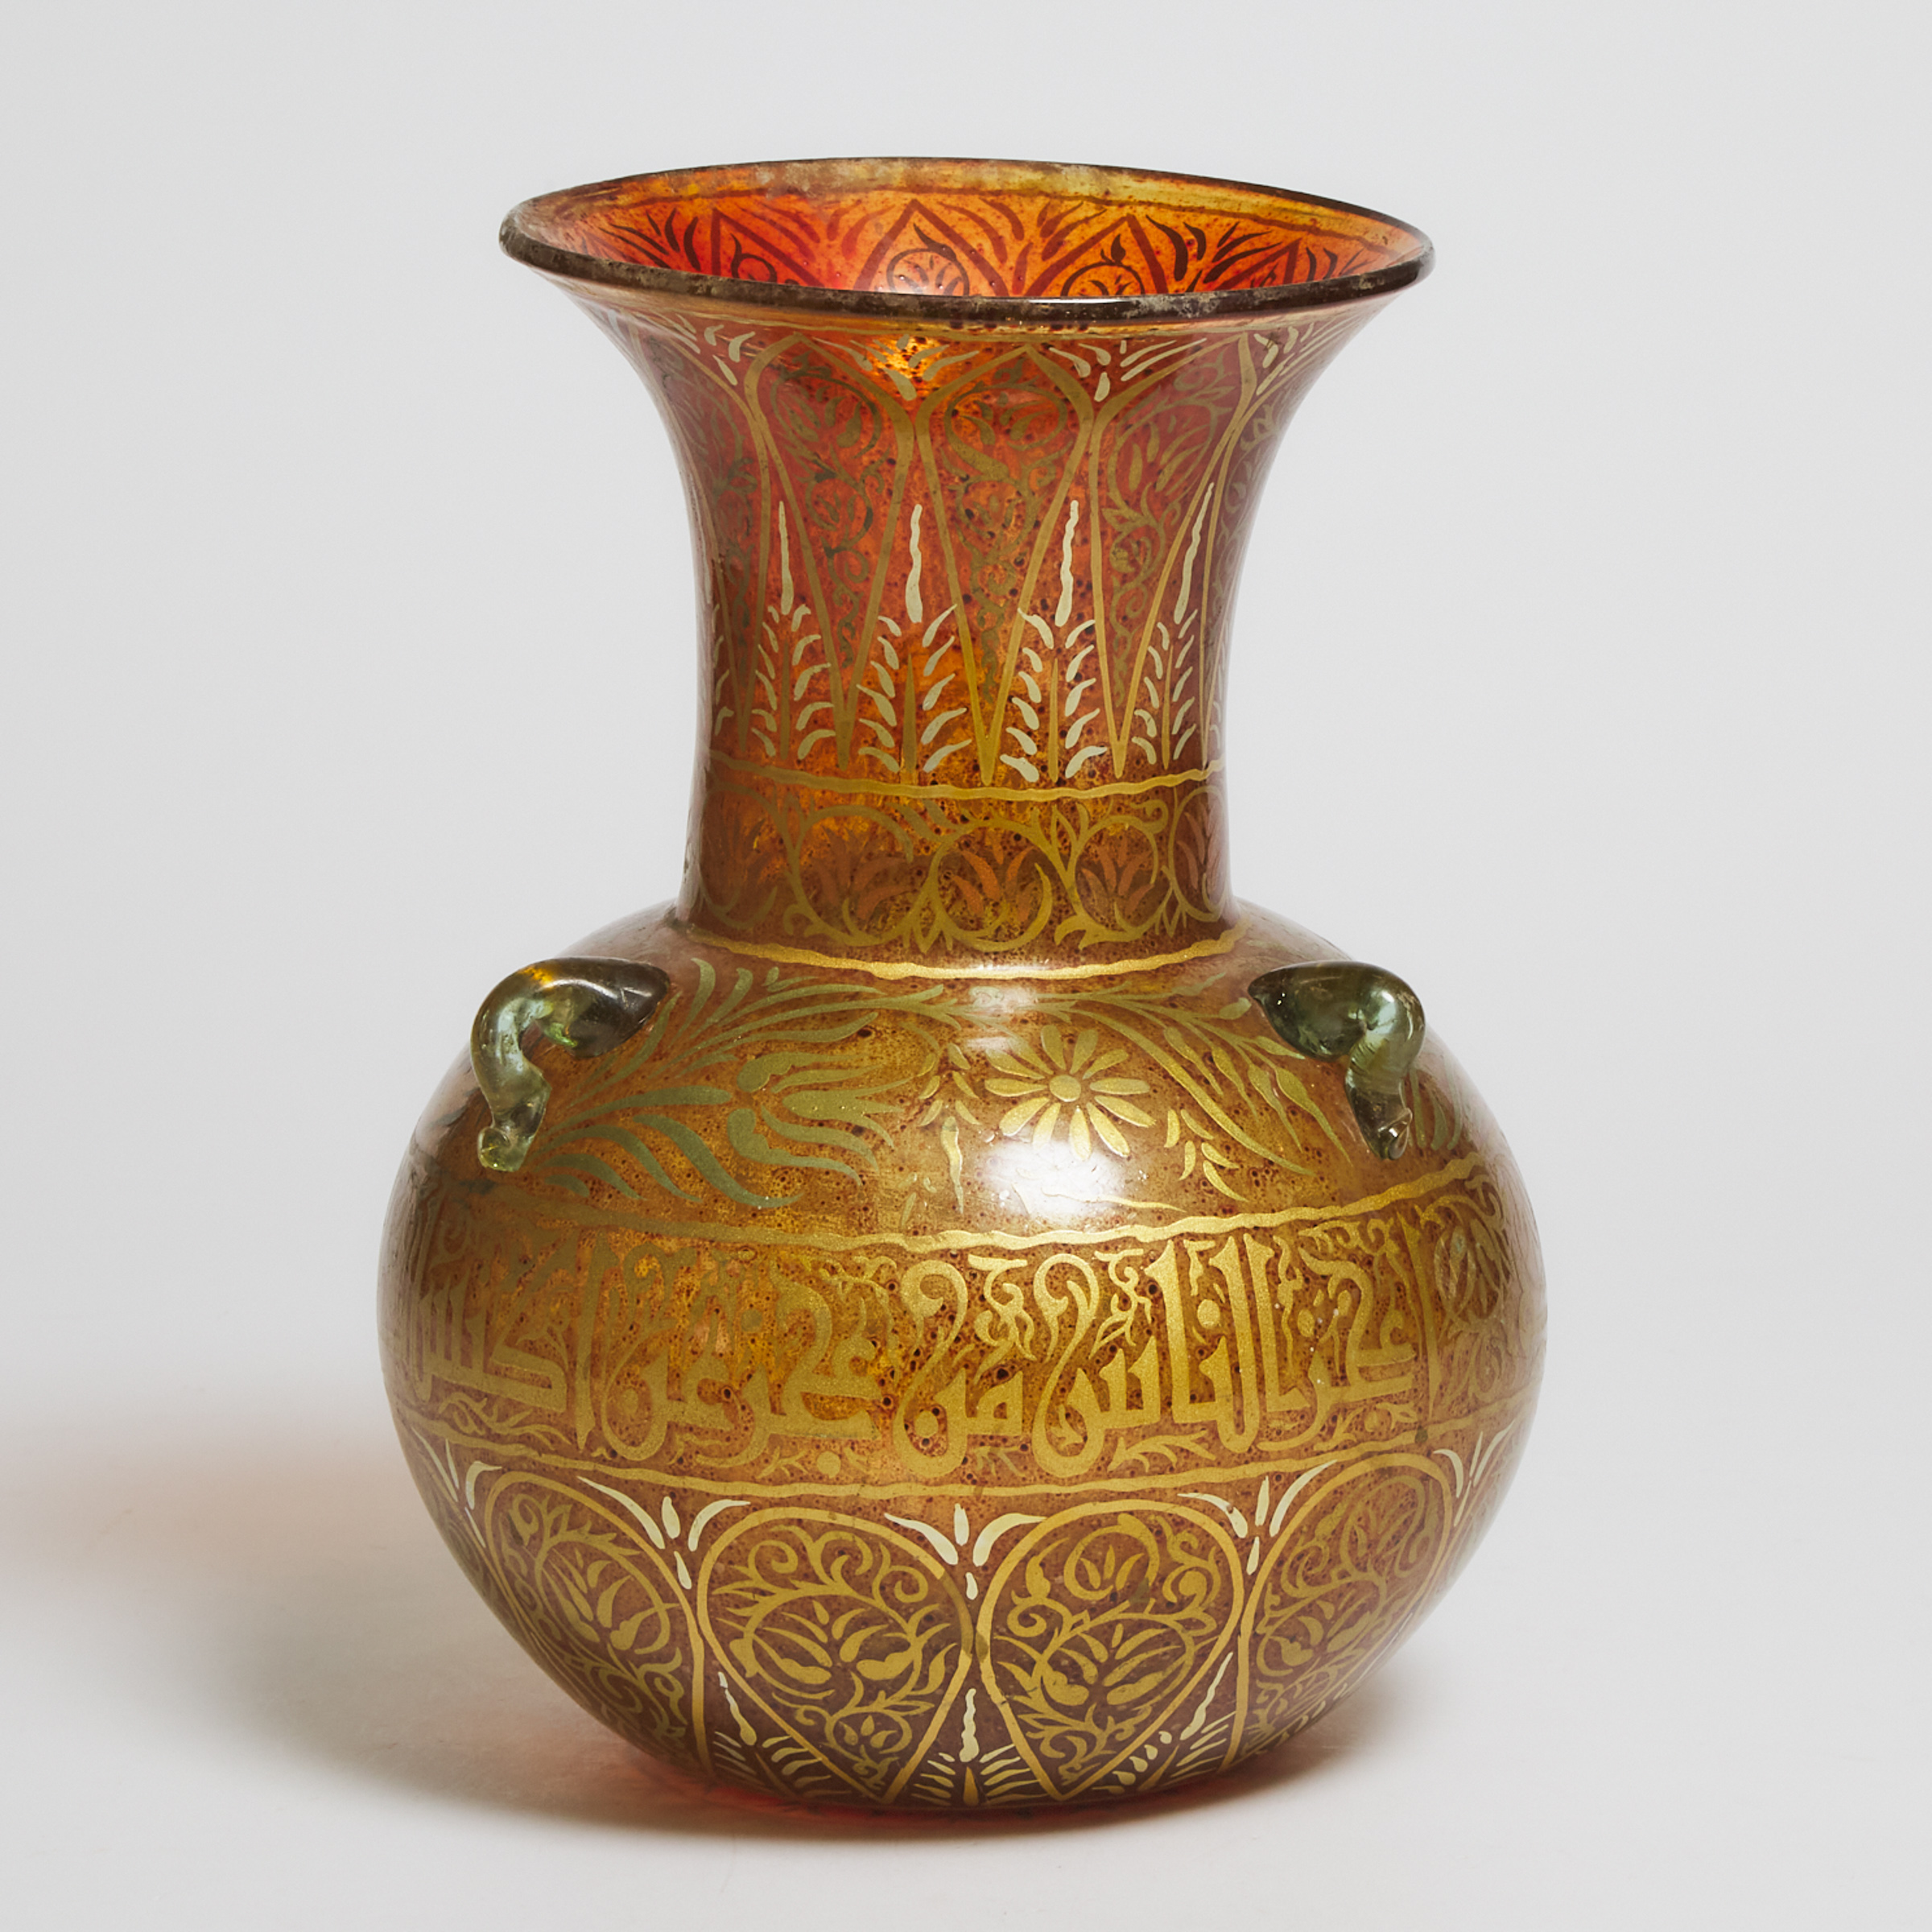 Middle Eastern Painted and Gilt Glass Mosque Lamp, late 19th century